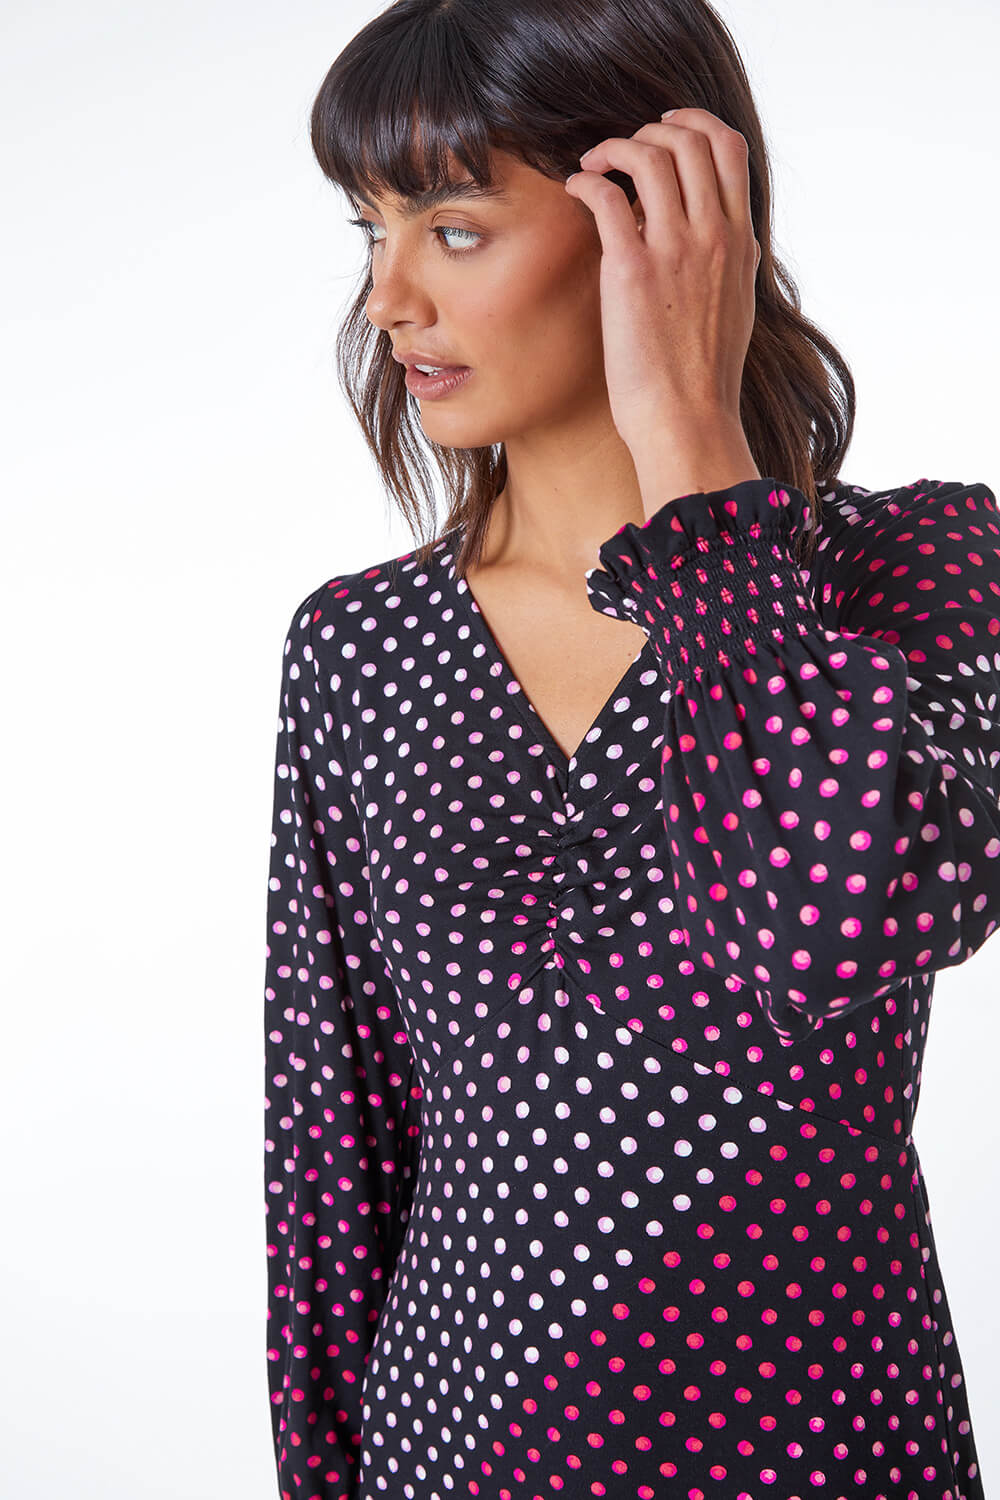 PINK Spot Print Ruched Detail Stretch Dress, Image 2 of 5